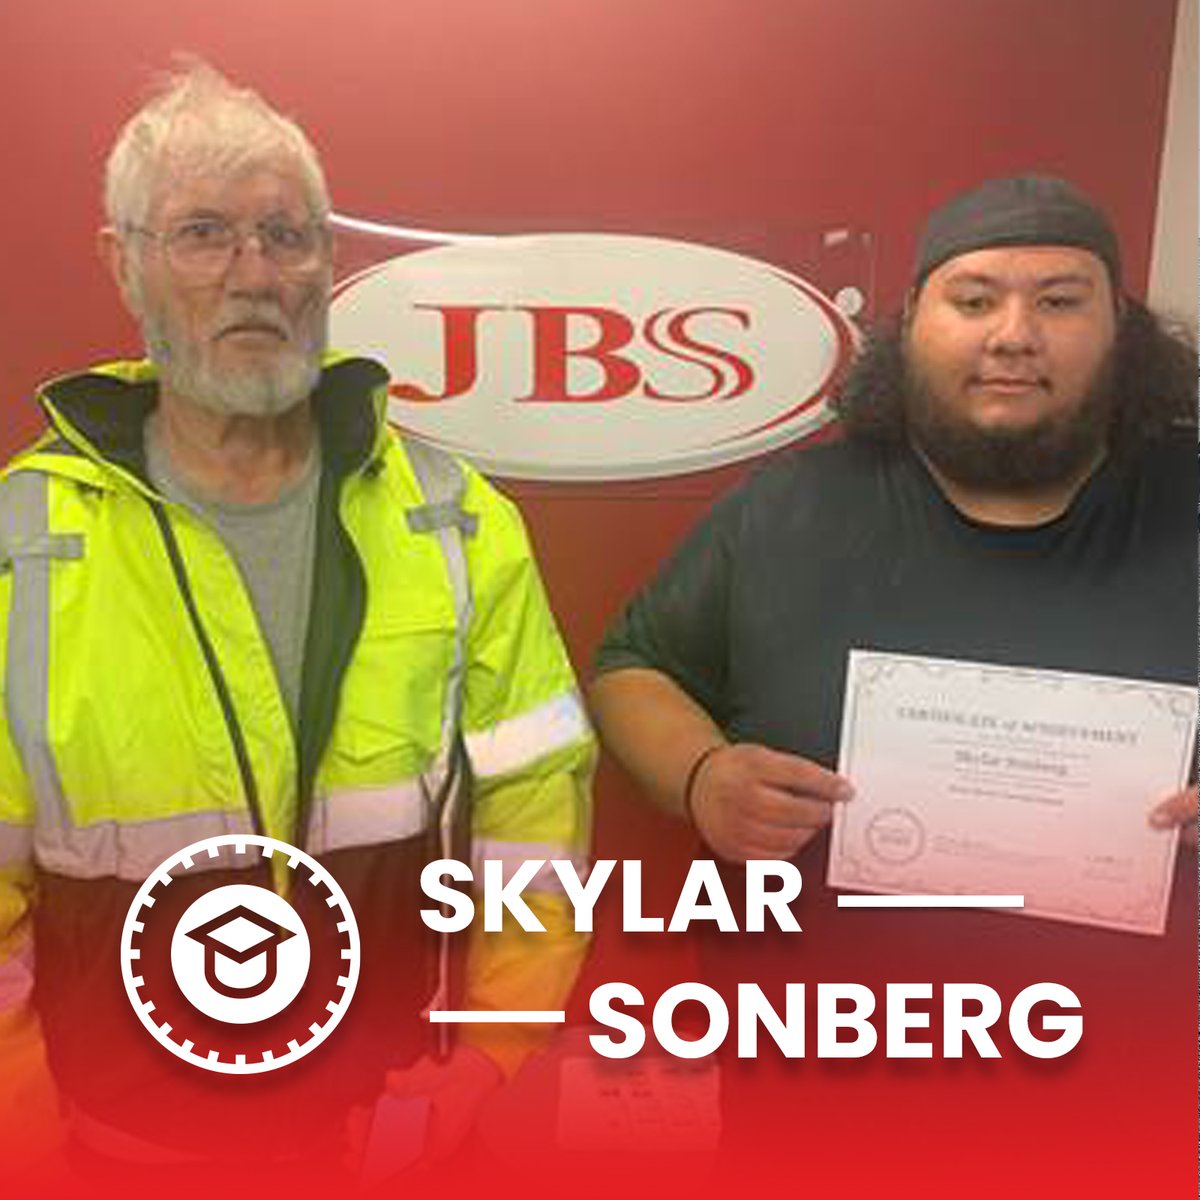 Congratulations to Skylar, who graduated from the JBS training program yesterday! Also pictured is Kim, who conducted his road test.

#driveJBSstrong #bigrig #semitrucklife